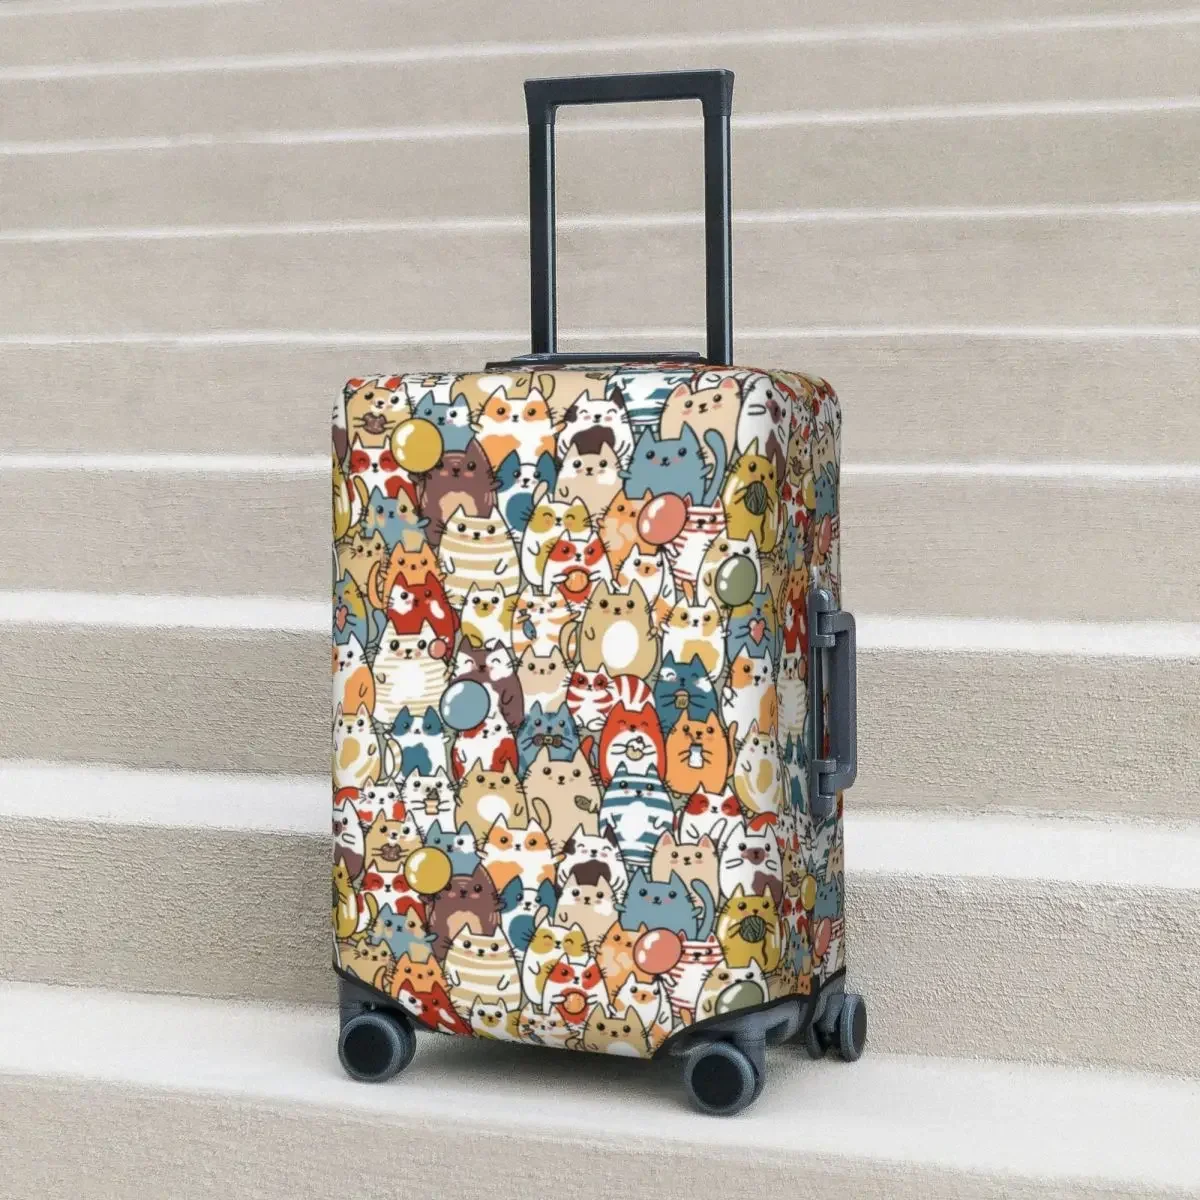 

Cute Cats Repeat Suitcase Cover Colourful Funny Animals Cartoon Holiday Cruise Trip Useful Luggage Accesories Protection